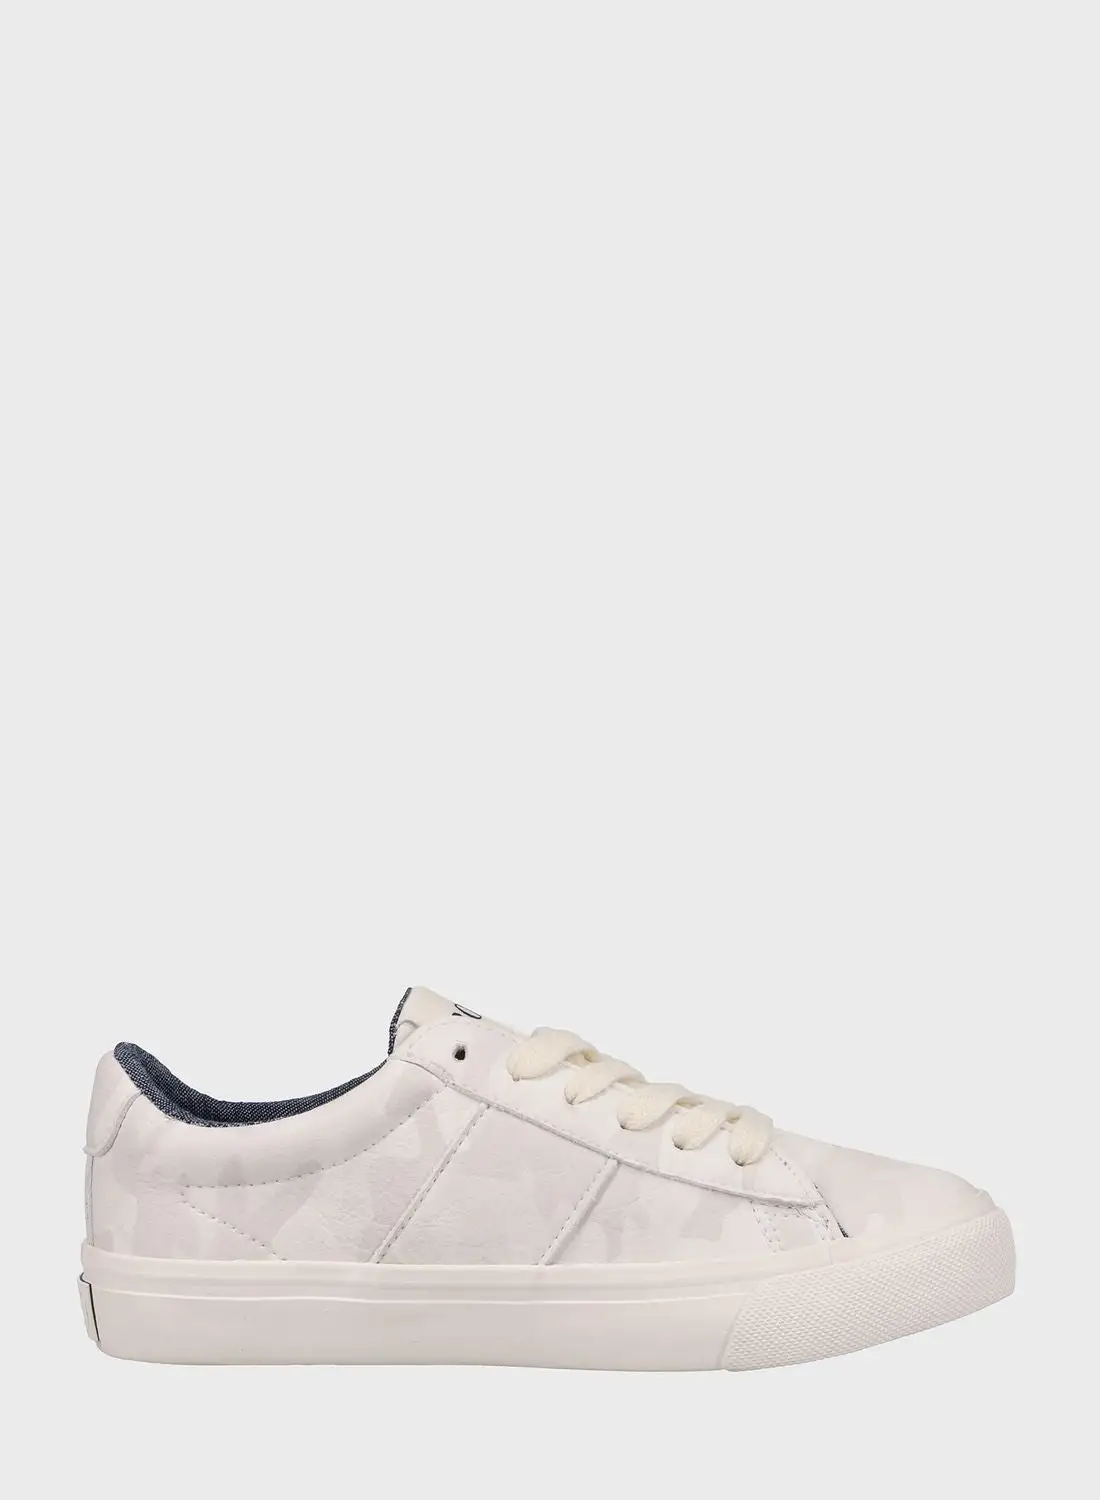 POLO RALPH LAUREN Youth Sayer Lace Up Sneakers